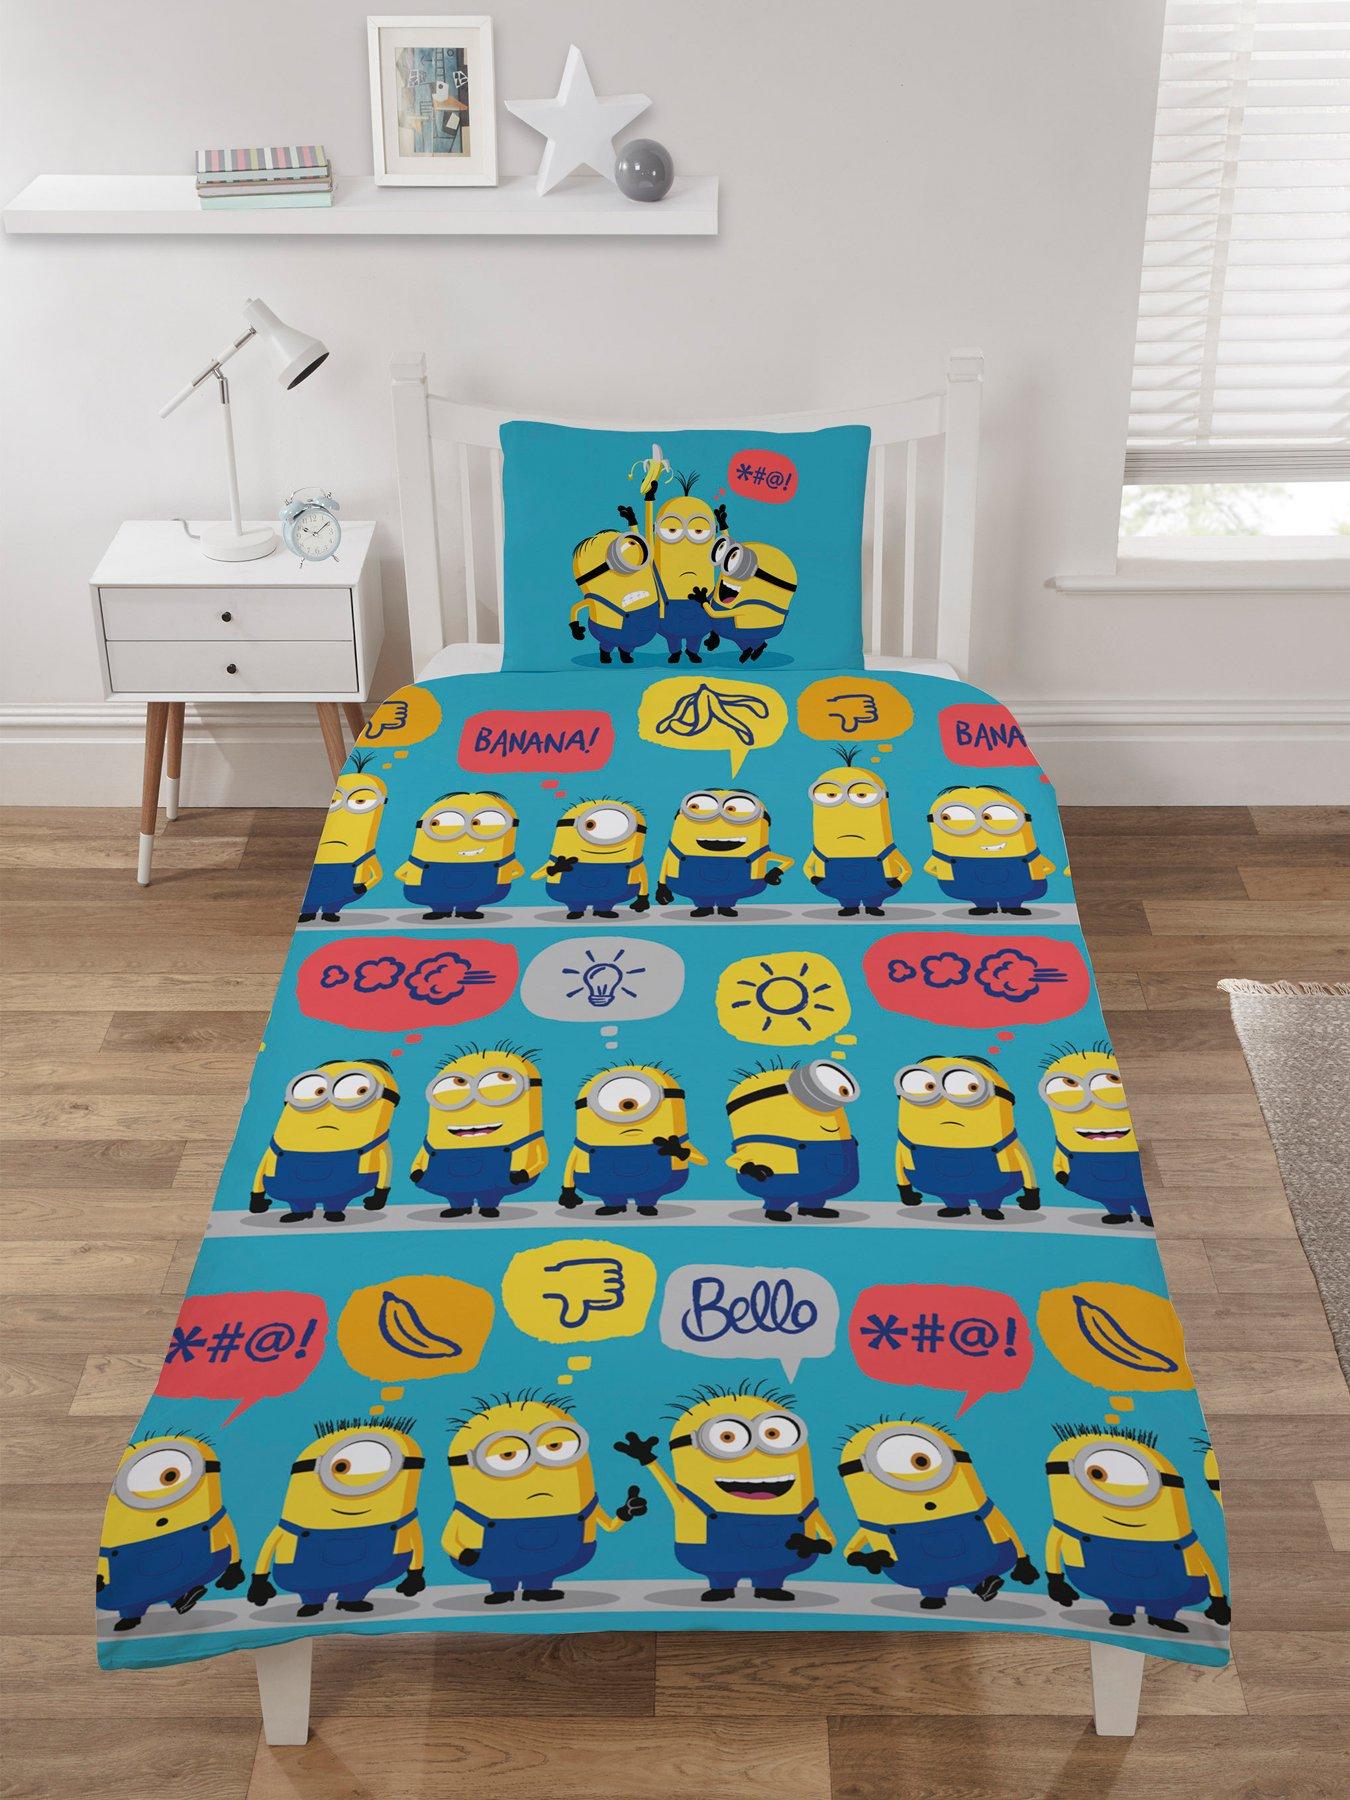 Details about    CHILDRENS BEDDING SET Soft Curtains Kids Duvet Cover Fitted Sheet Pillow Cases 